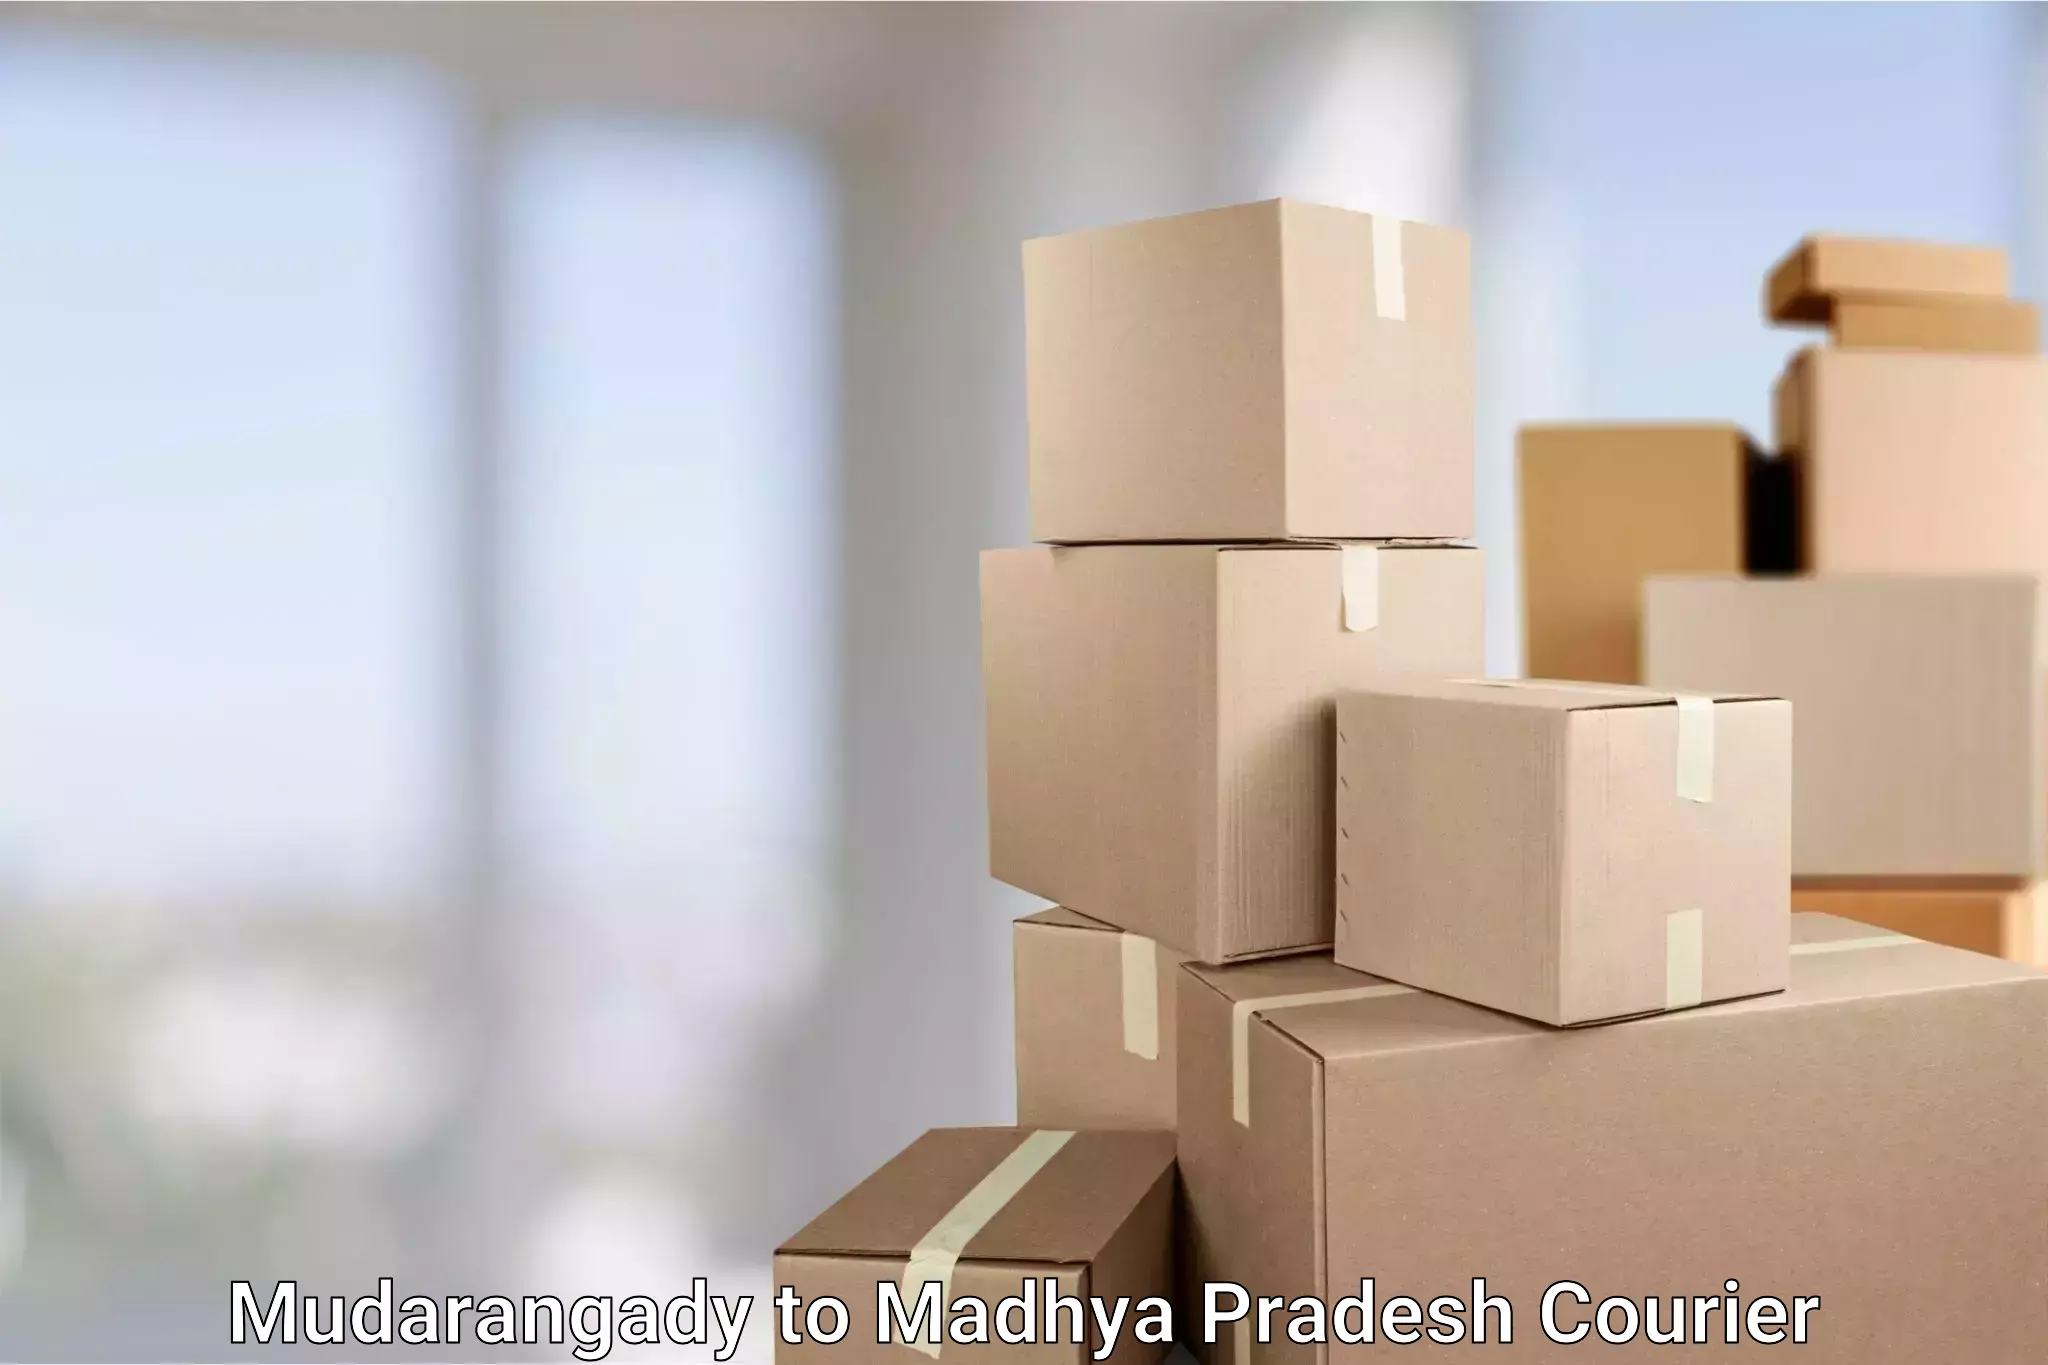 Wholesale parcel delivery Mudarangady to Umaria